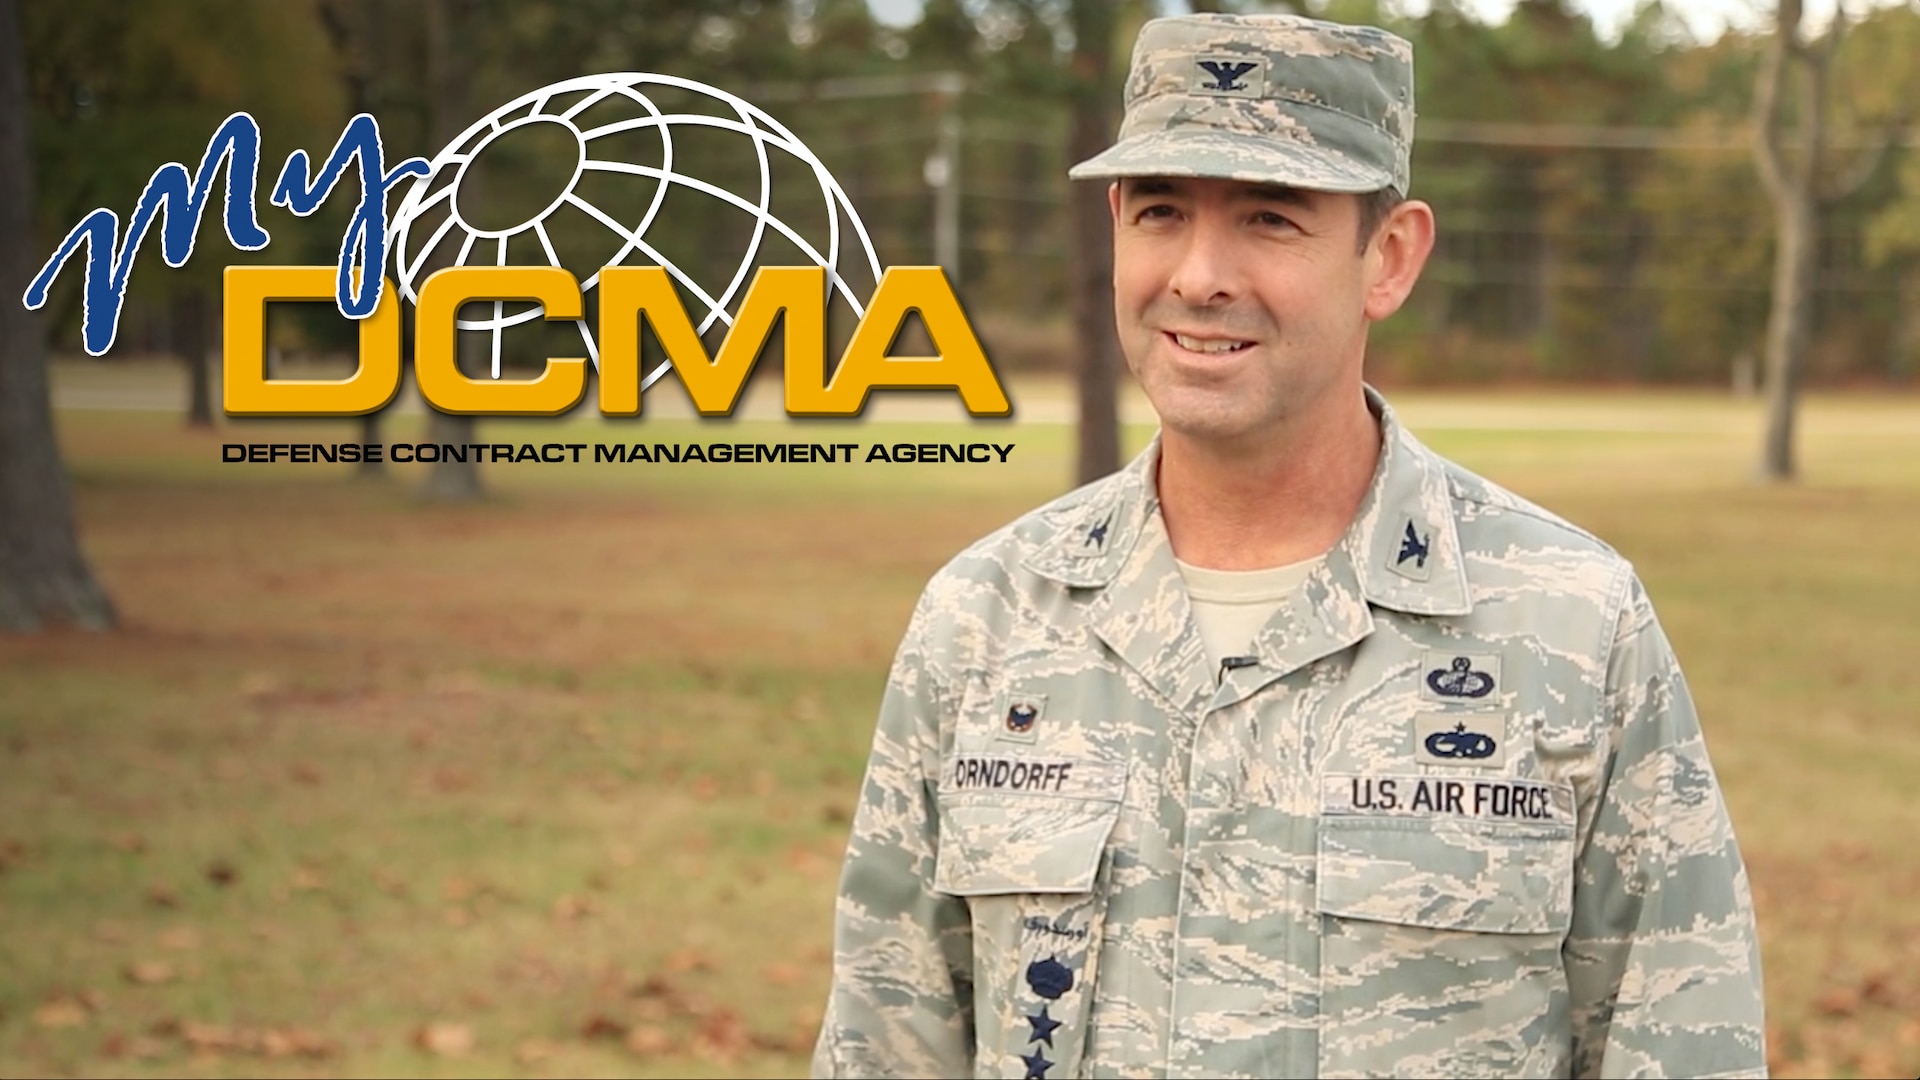 My DCMA is an opportunity to hear directly from the Defense Contract Management Agency's experienced and diverse workforce about what being a part of the national defense team means to them. Featured in this edition is Air Force Col. Louis Orndorff, the commander of DCMA Middle East. Col. Orndorff discusses his team's mission with Foreign Military Sales and its importance to our US warfighters and foreign partners for security cooperation and stability efforts in the Middle East